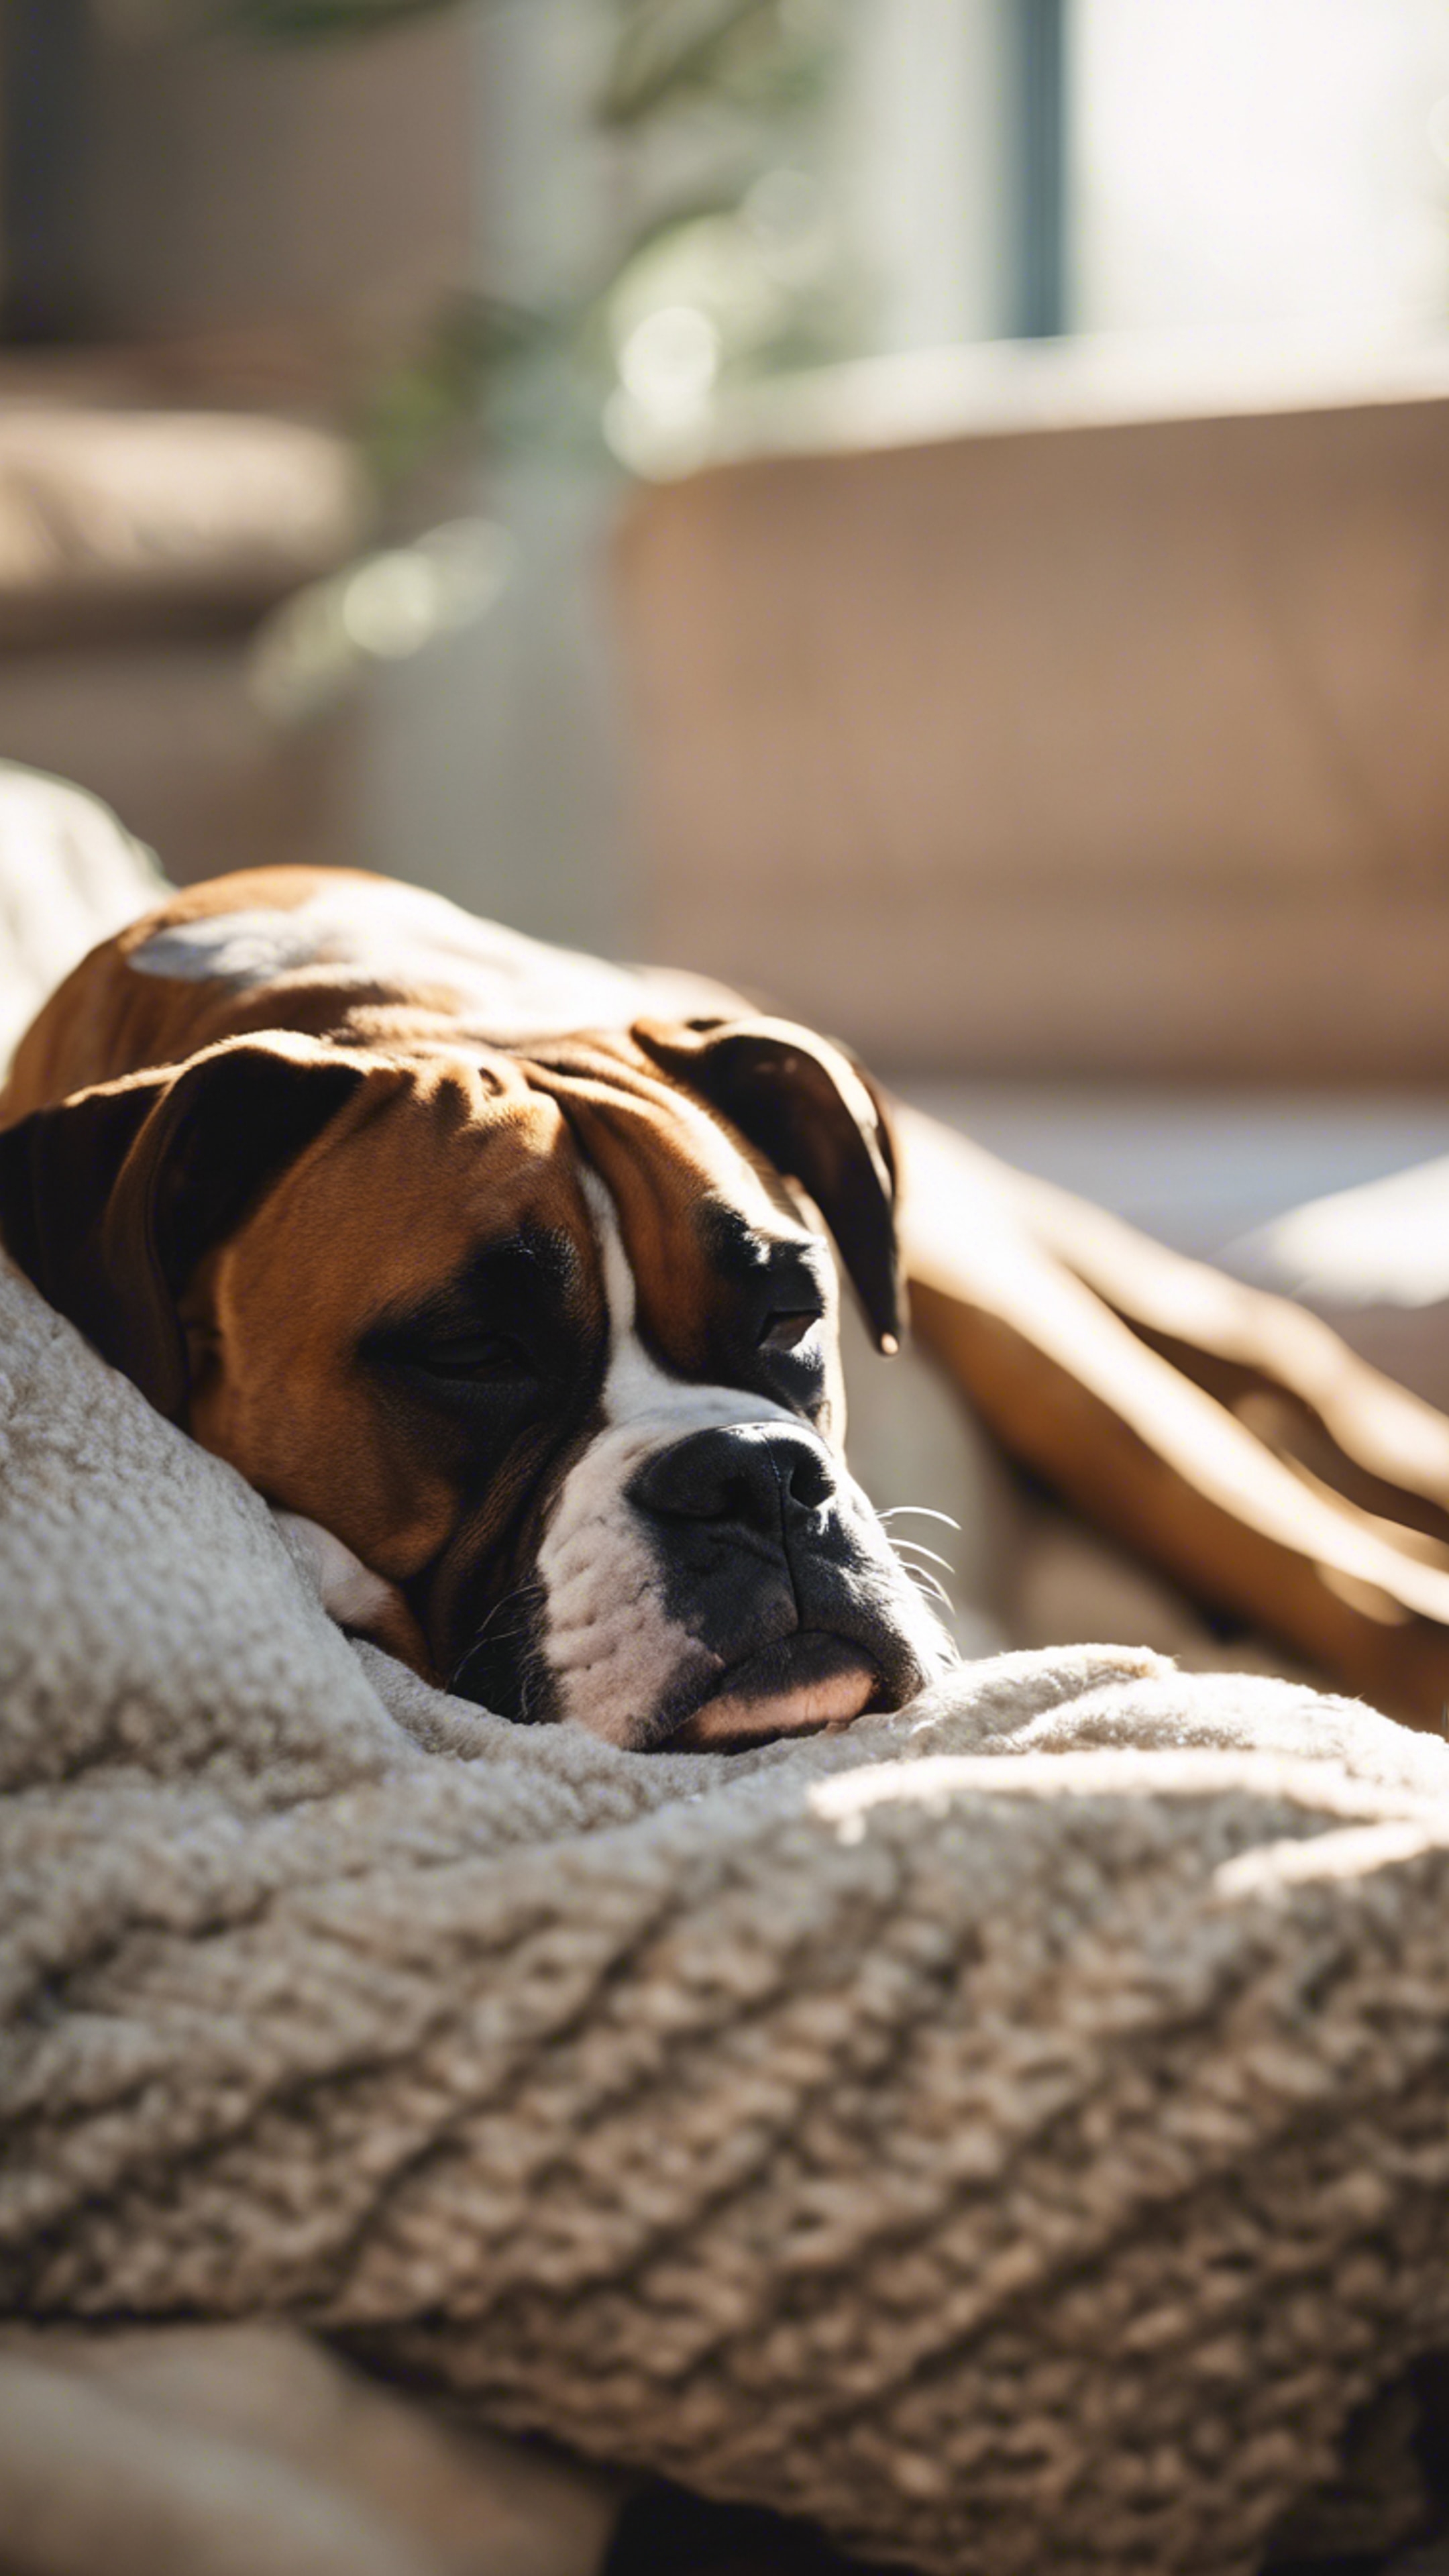 A tired senior Boxer dog napping in his sunlit bed after a day of play in a light-filled room.壁紙[541dfca7db3d45608681]